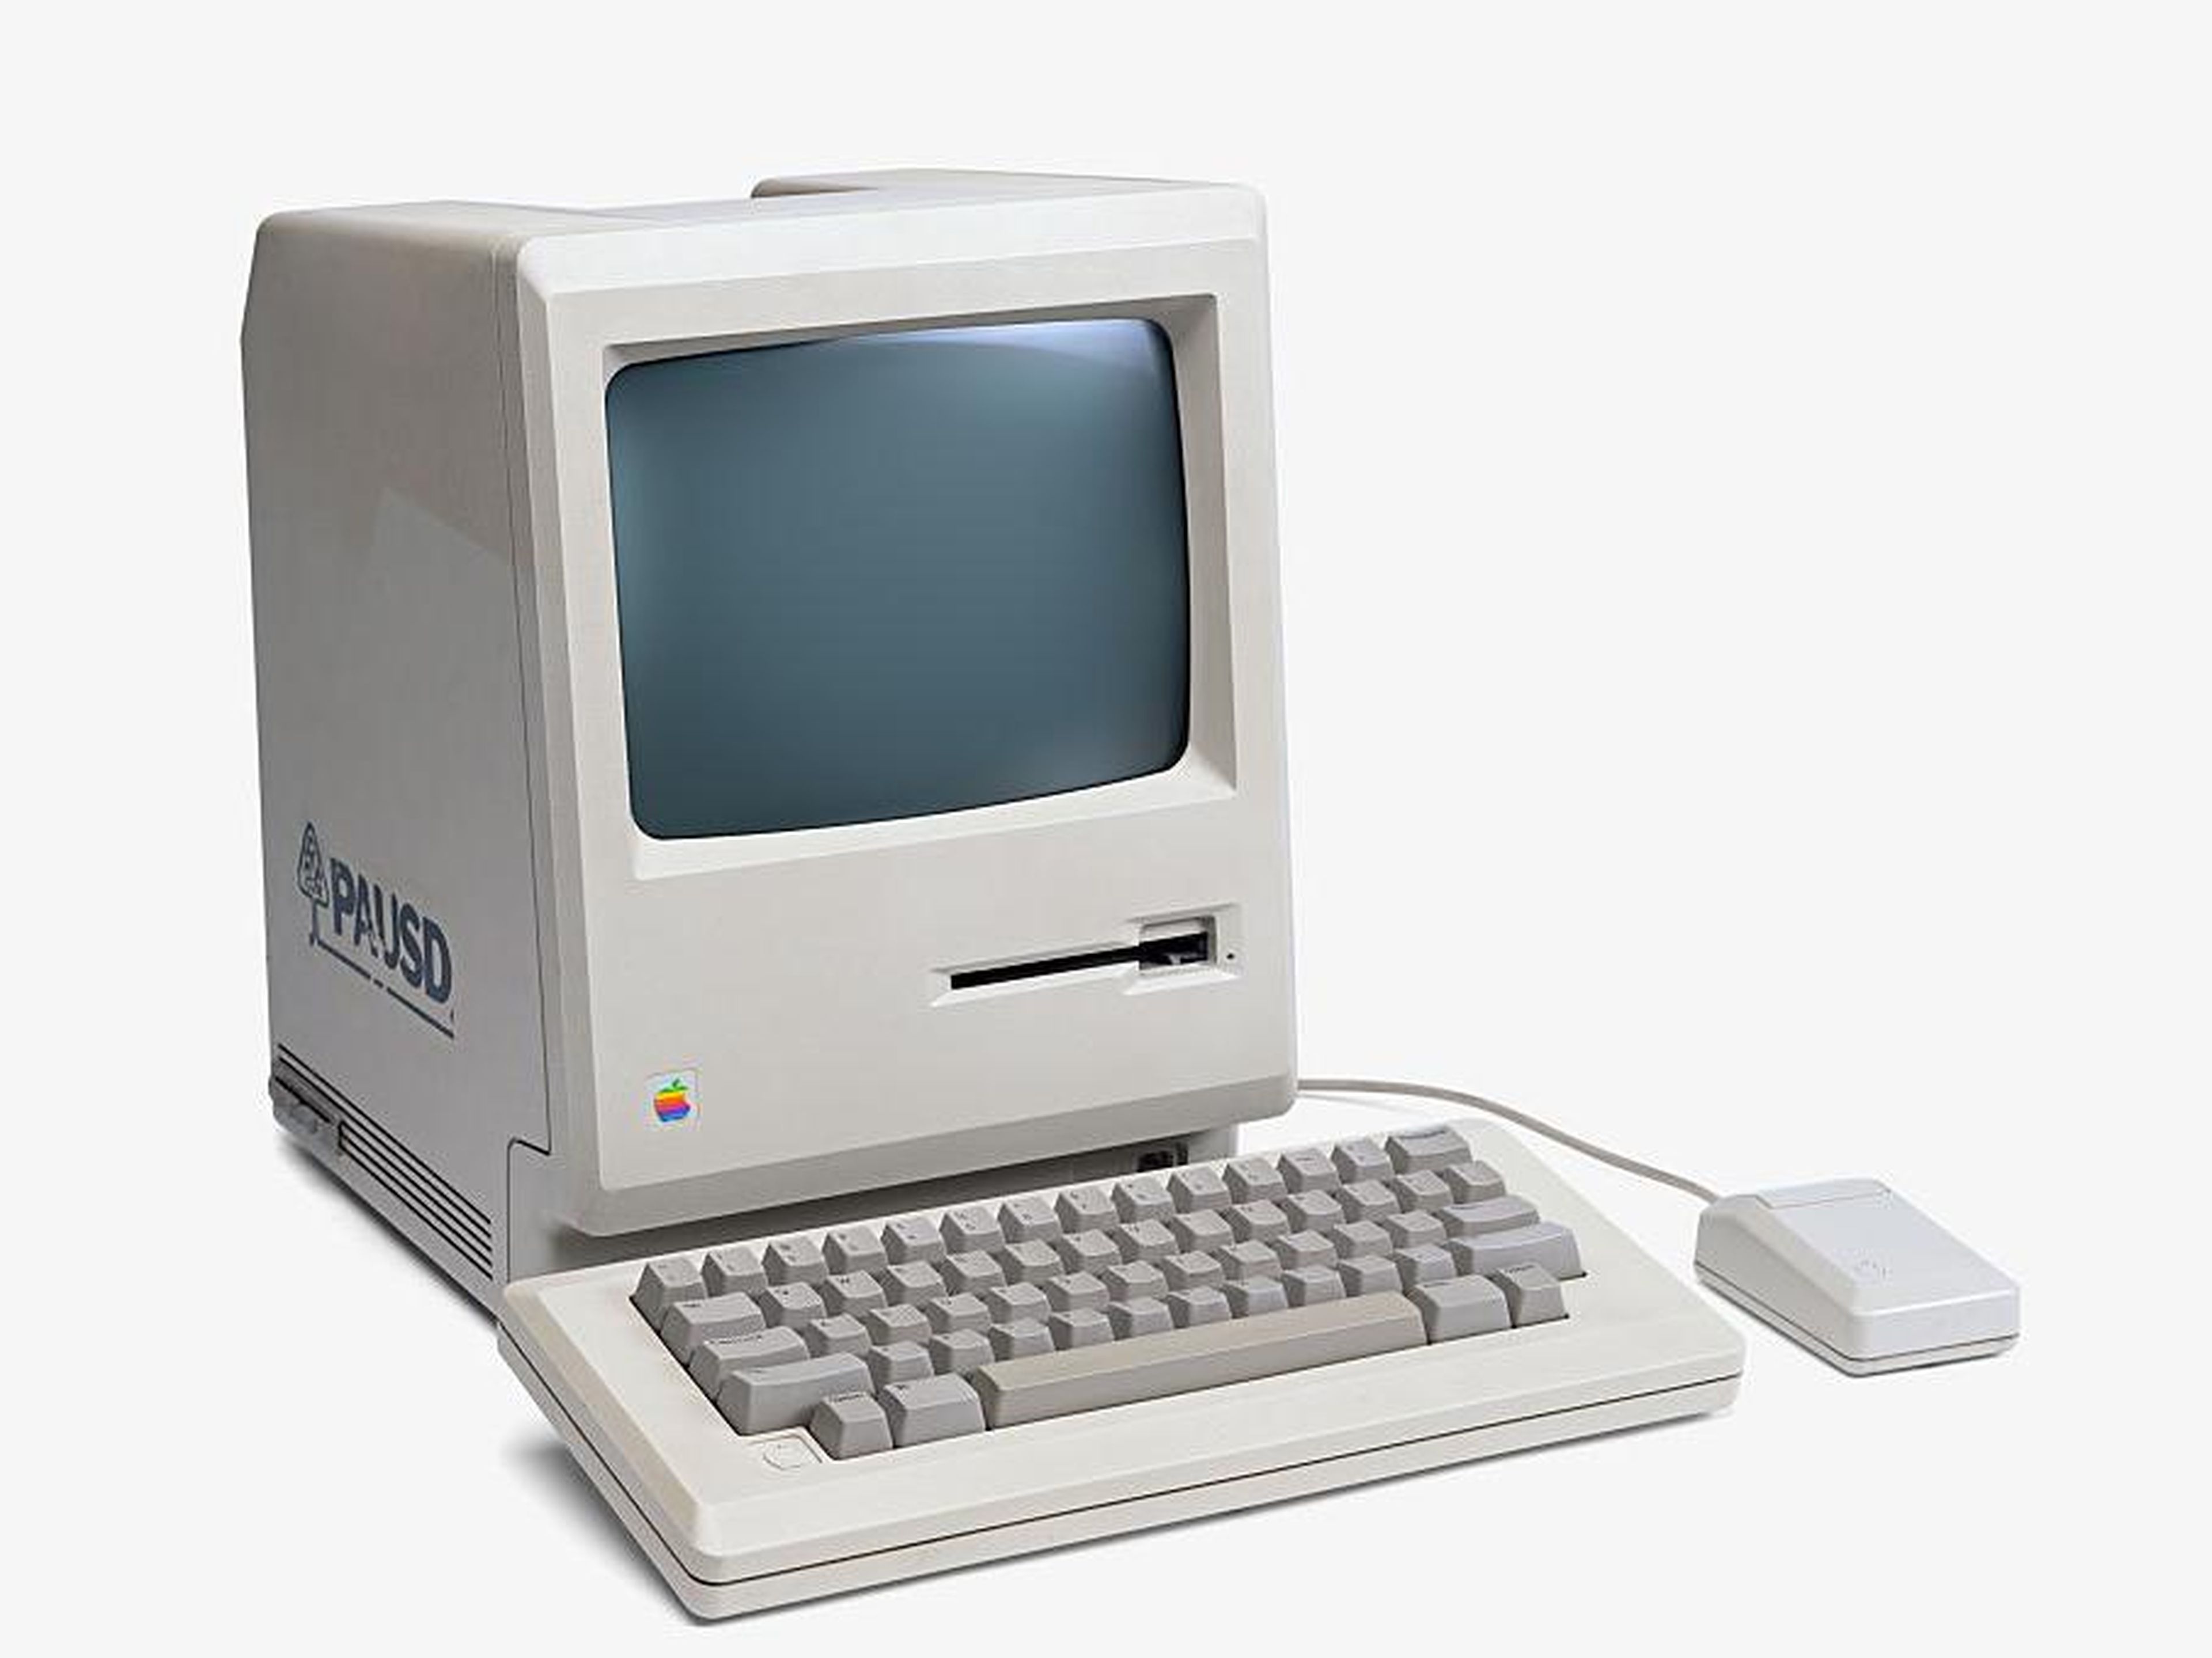 The Apple Macintosh made its debut in 1984 as the first mass-market personal computer.